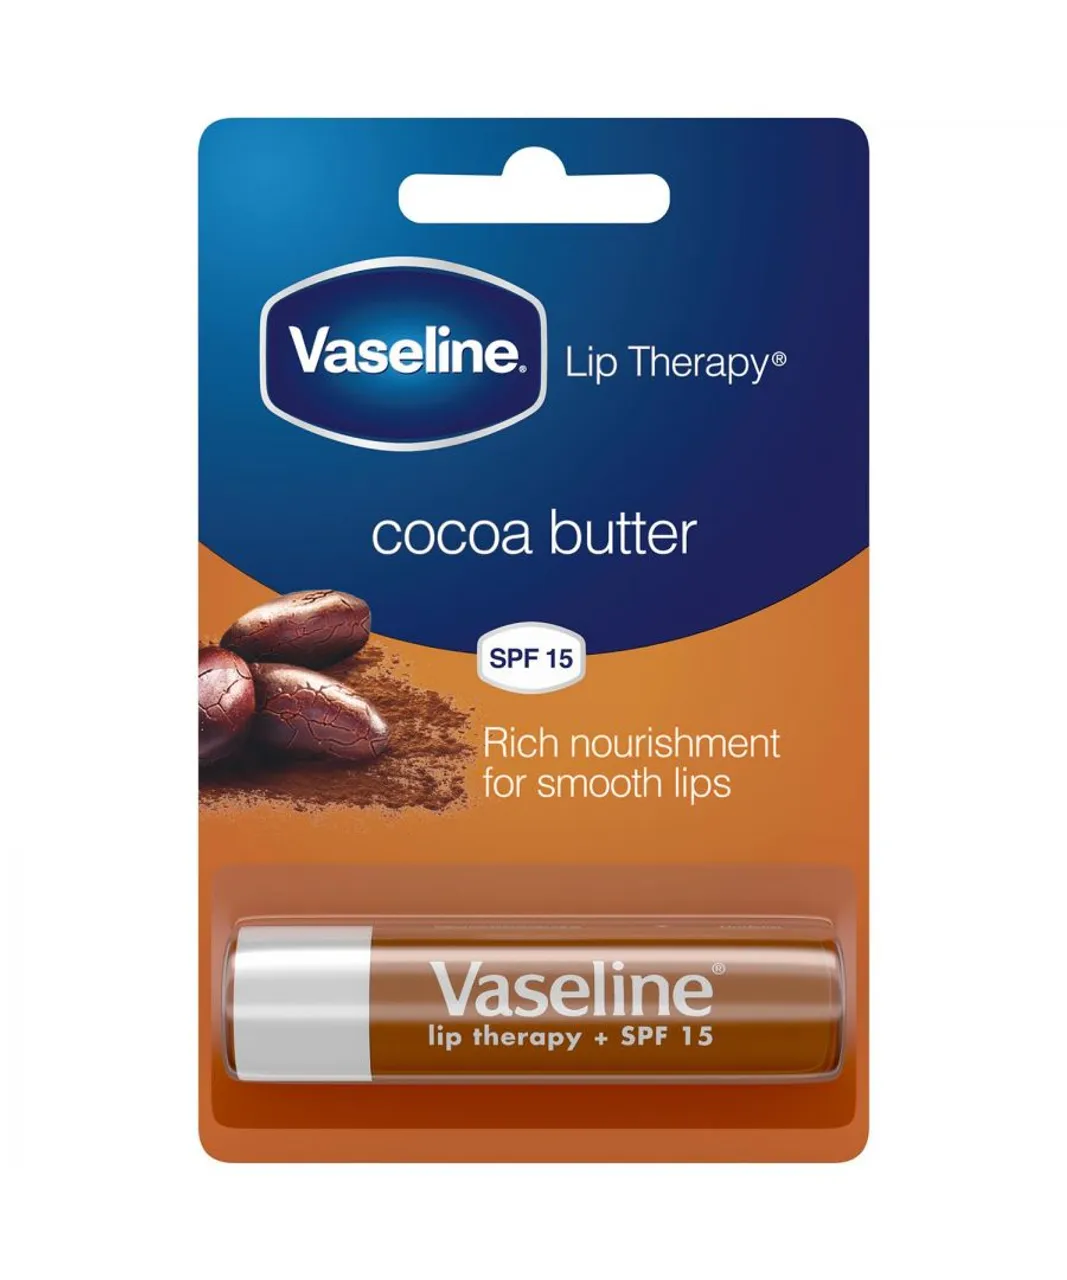 Vaseline Unisex Cocoa Butter Rich Nourishment Lip Therapy Jelly Balm Sticks, 4g, 3pack - Brown - One Size